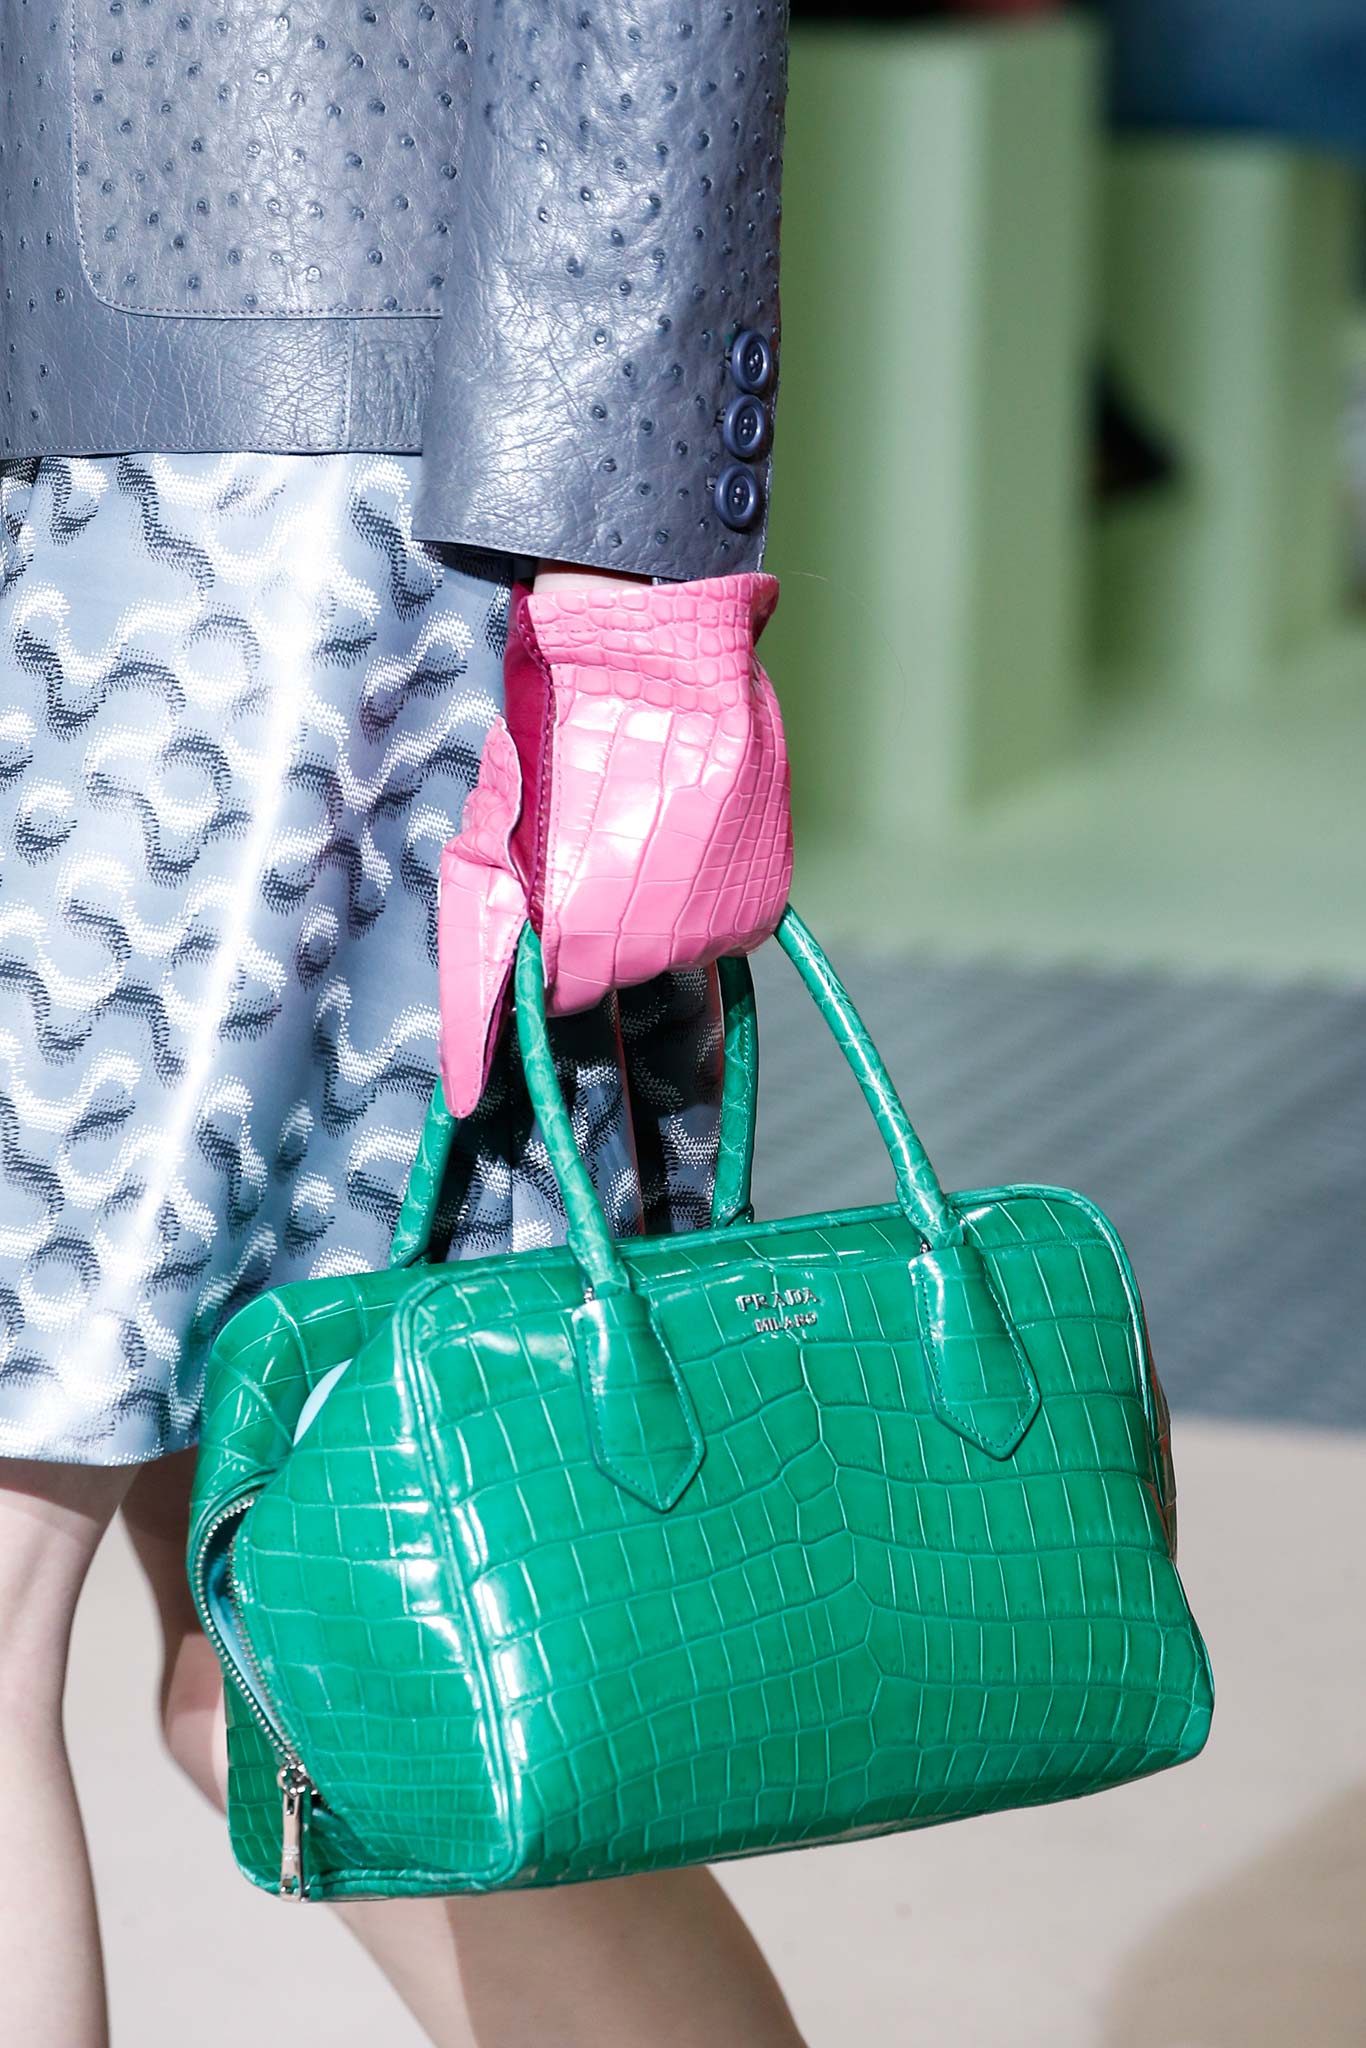 Prada Spring 2021 Bag Collection featuring Pastels - Spotted Fashion